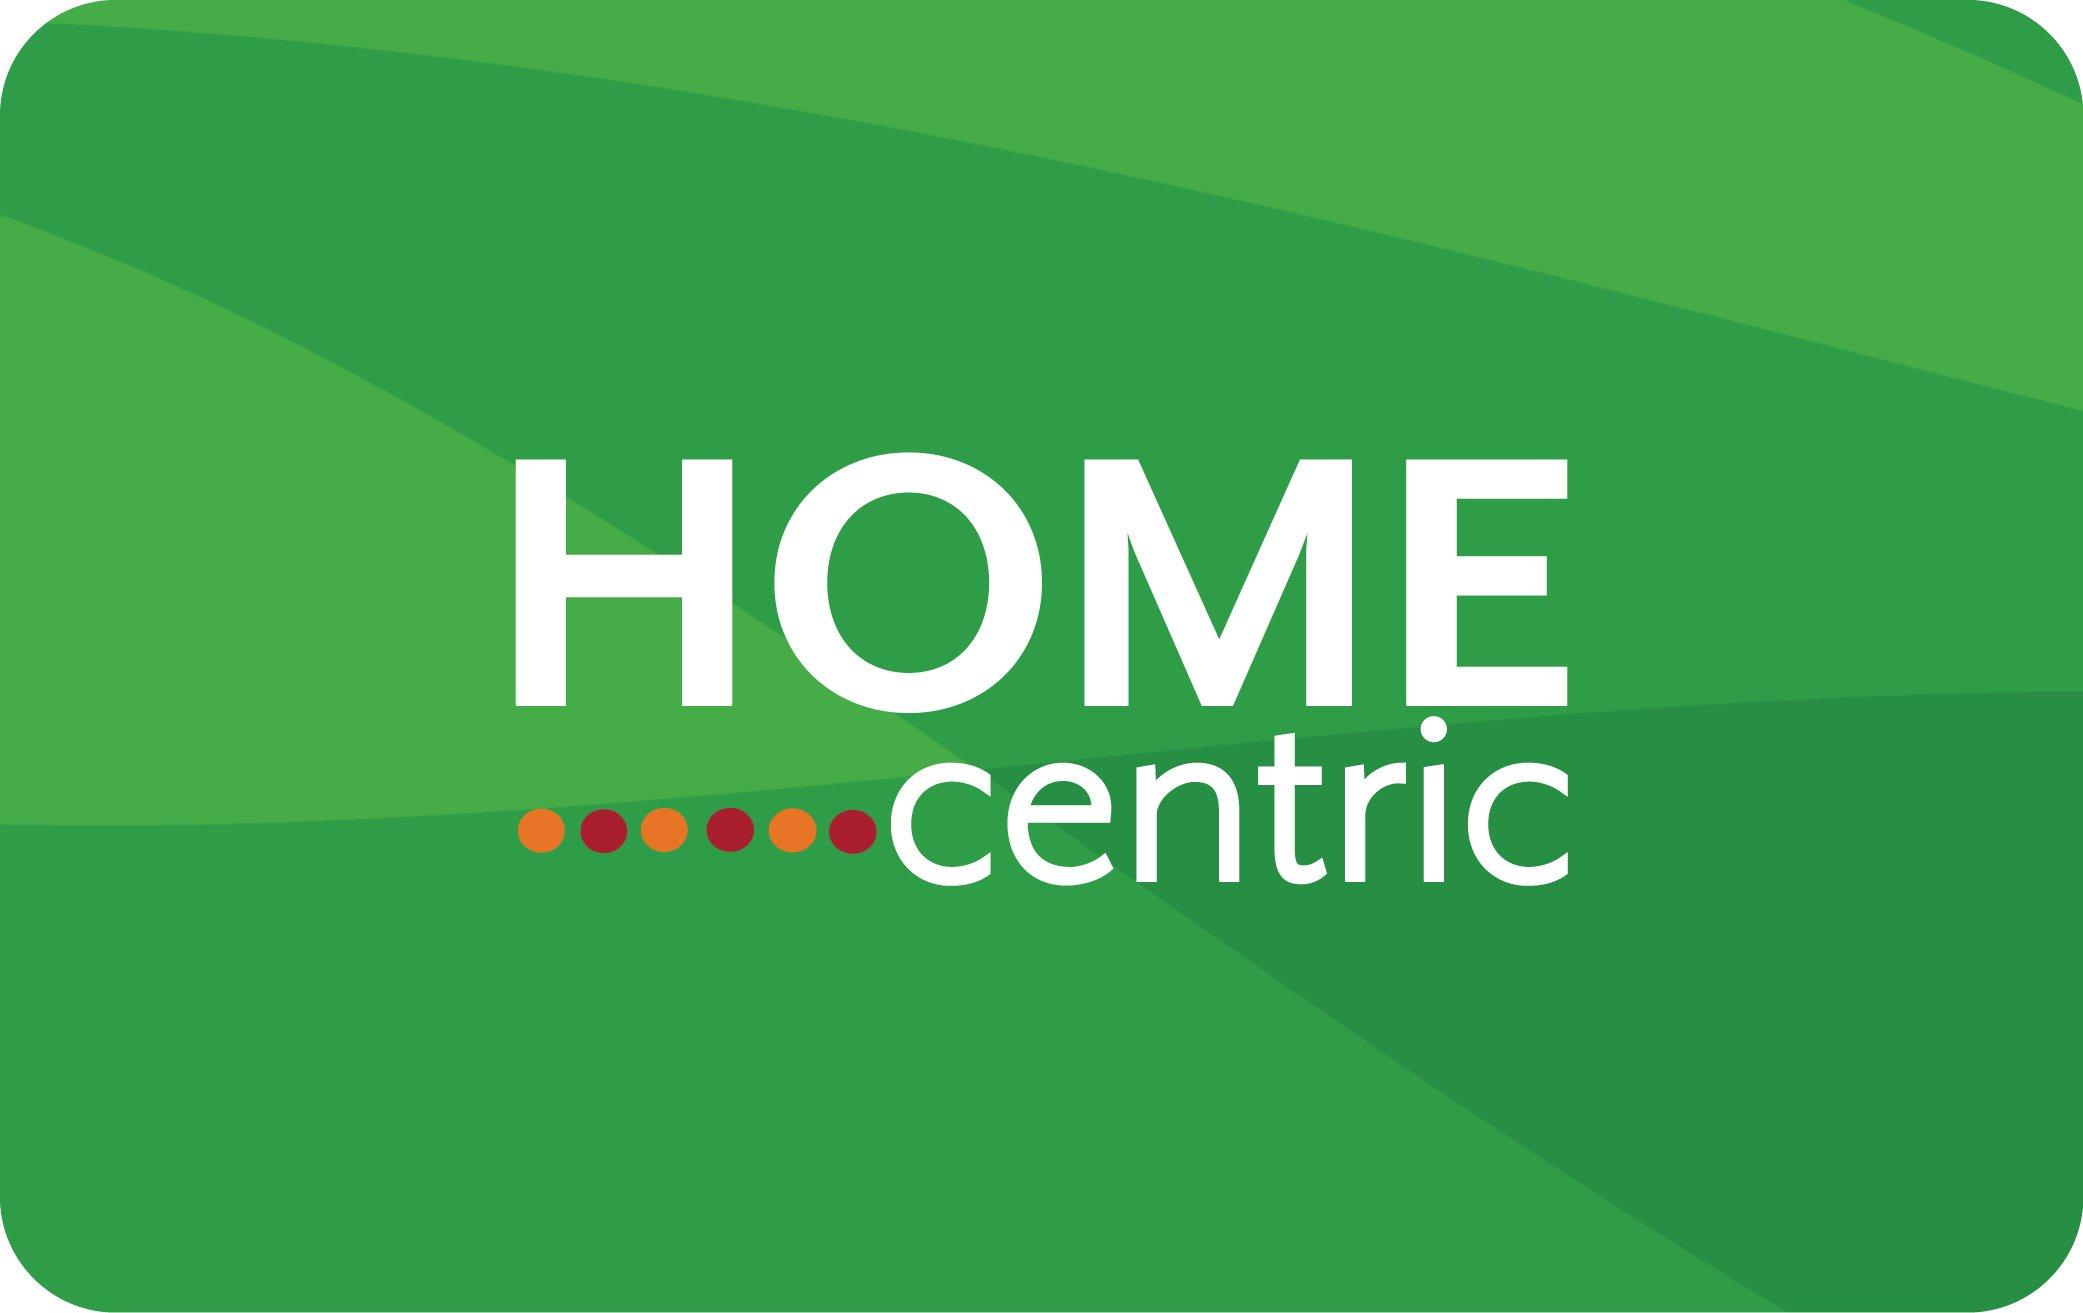 Home Centric Green Gift Card